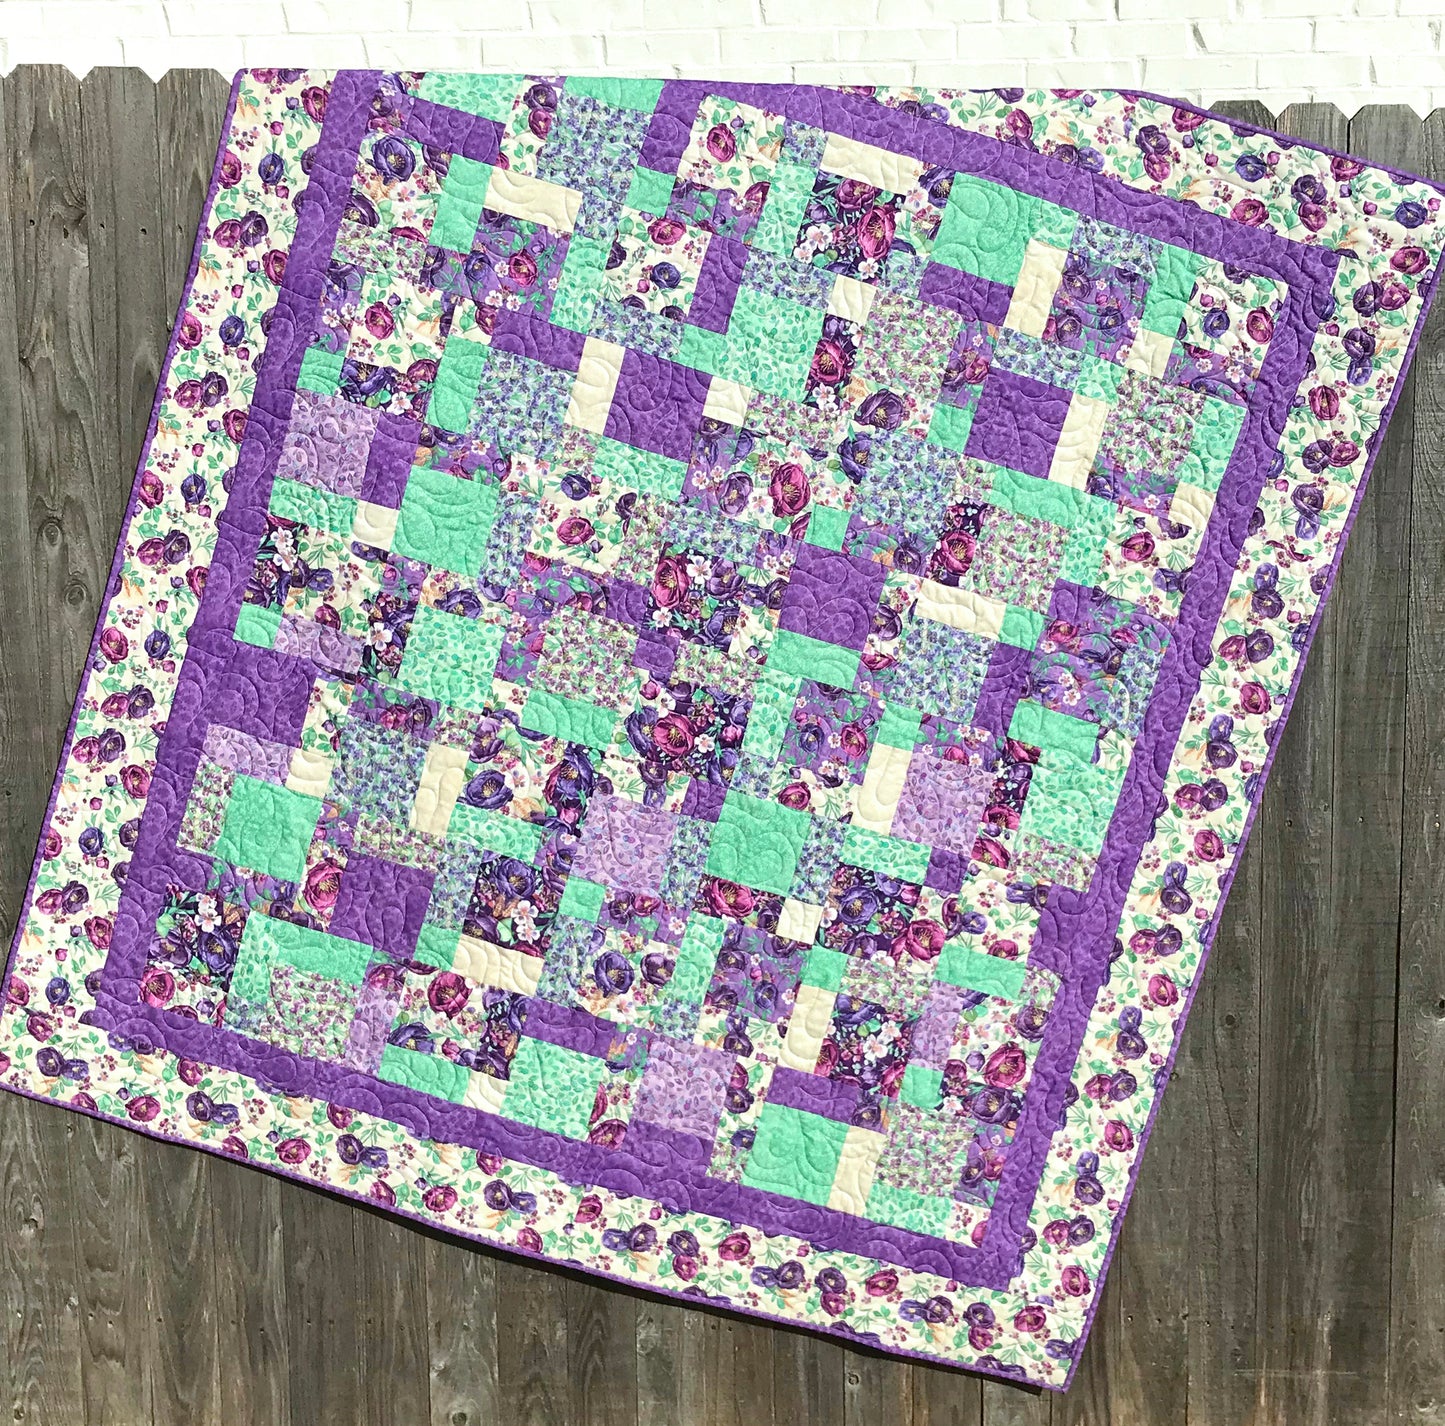 Charming Four Patch Quilt Pattern for Charm Squares - Digital Quilt Pattern - Handmade Quilts, Digital Patterns, and Home Décor items online - Cuddle Cat Quiltworks